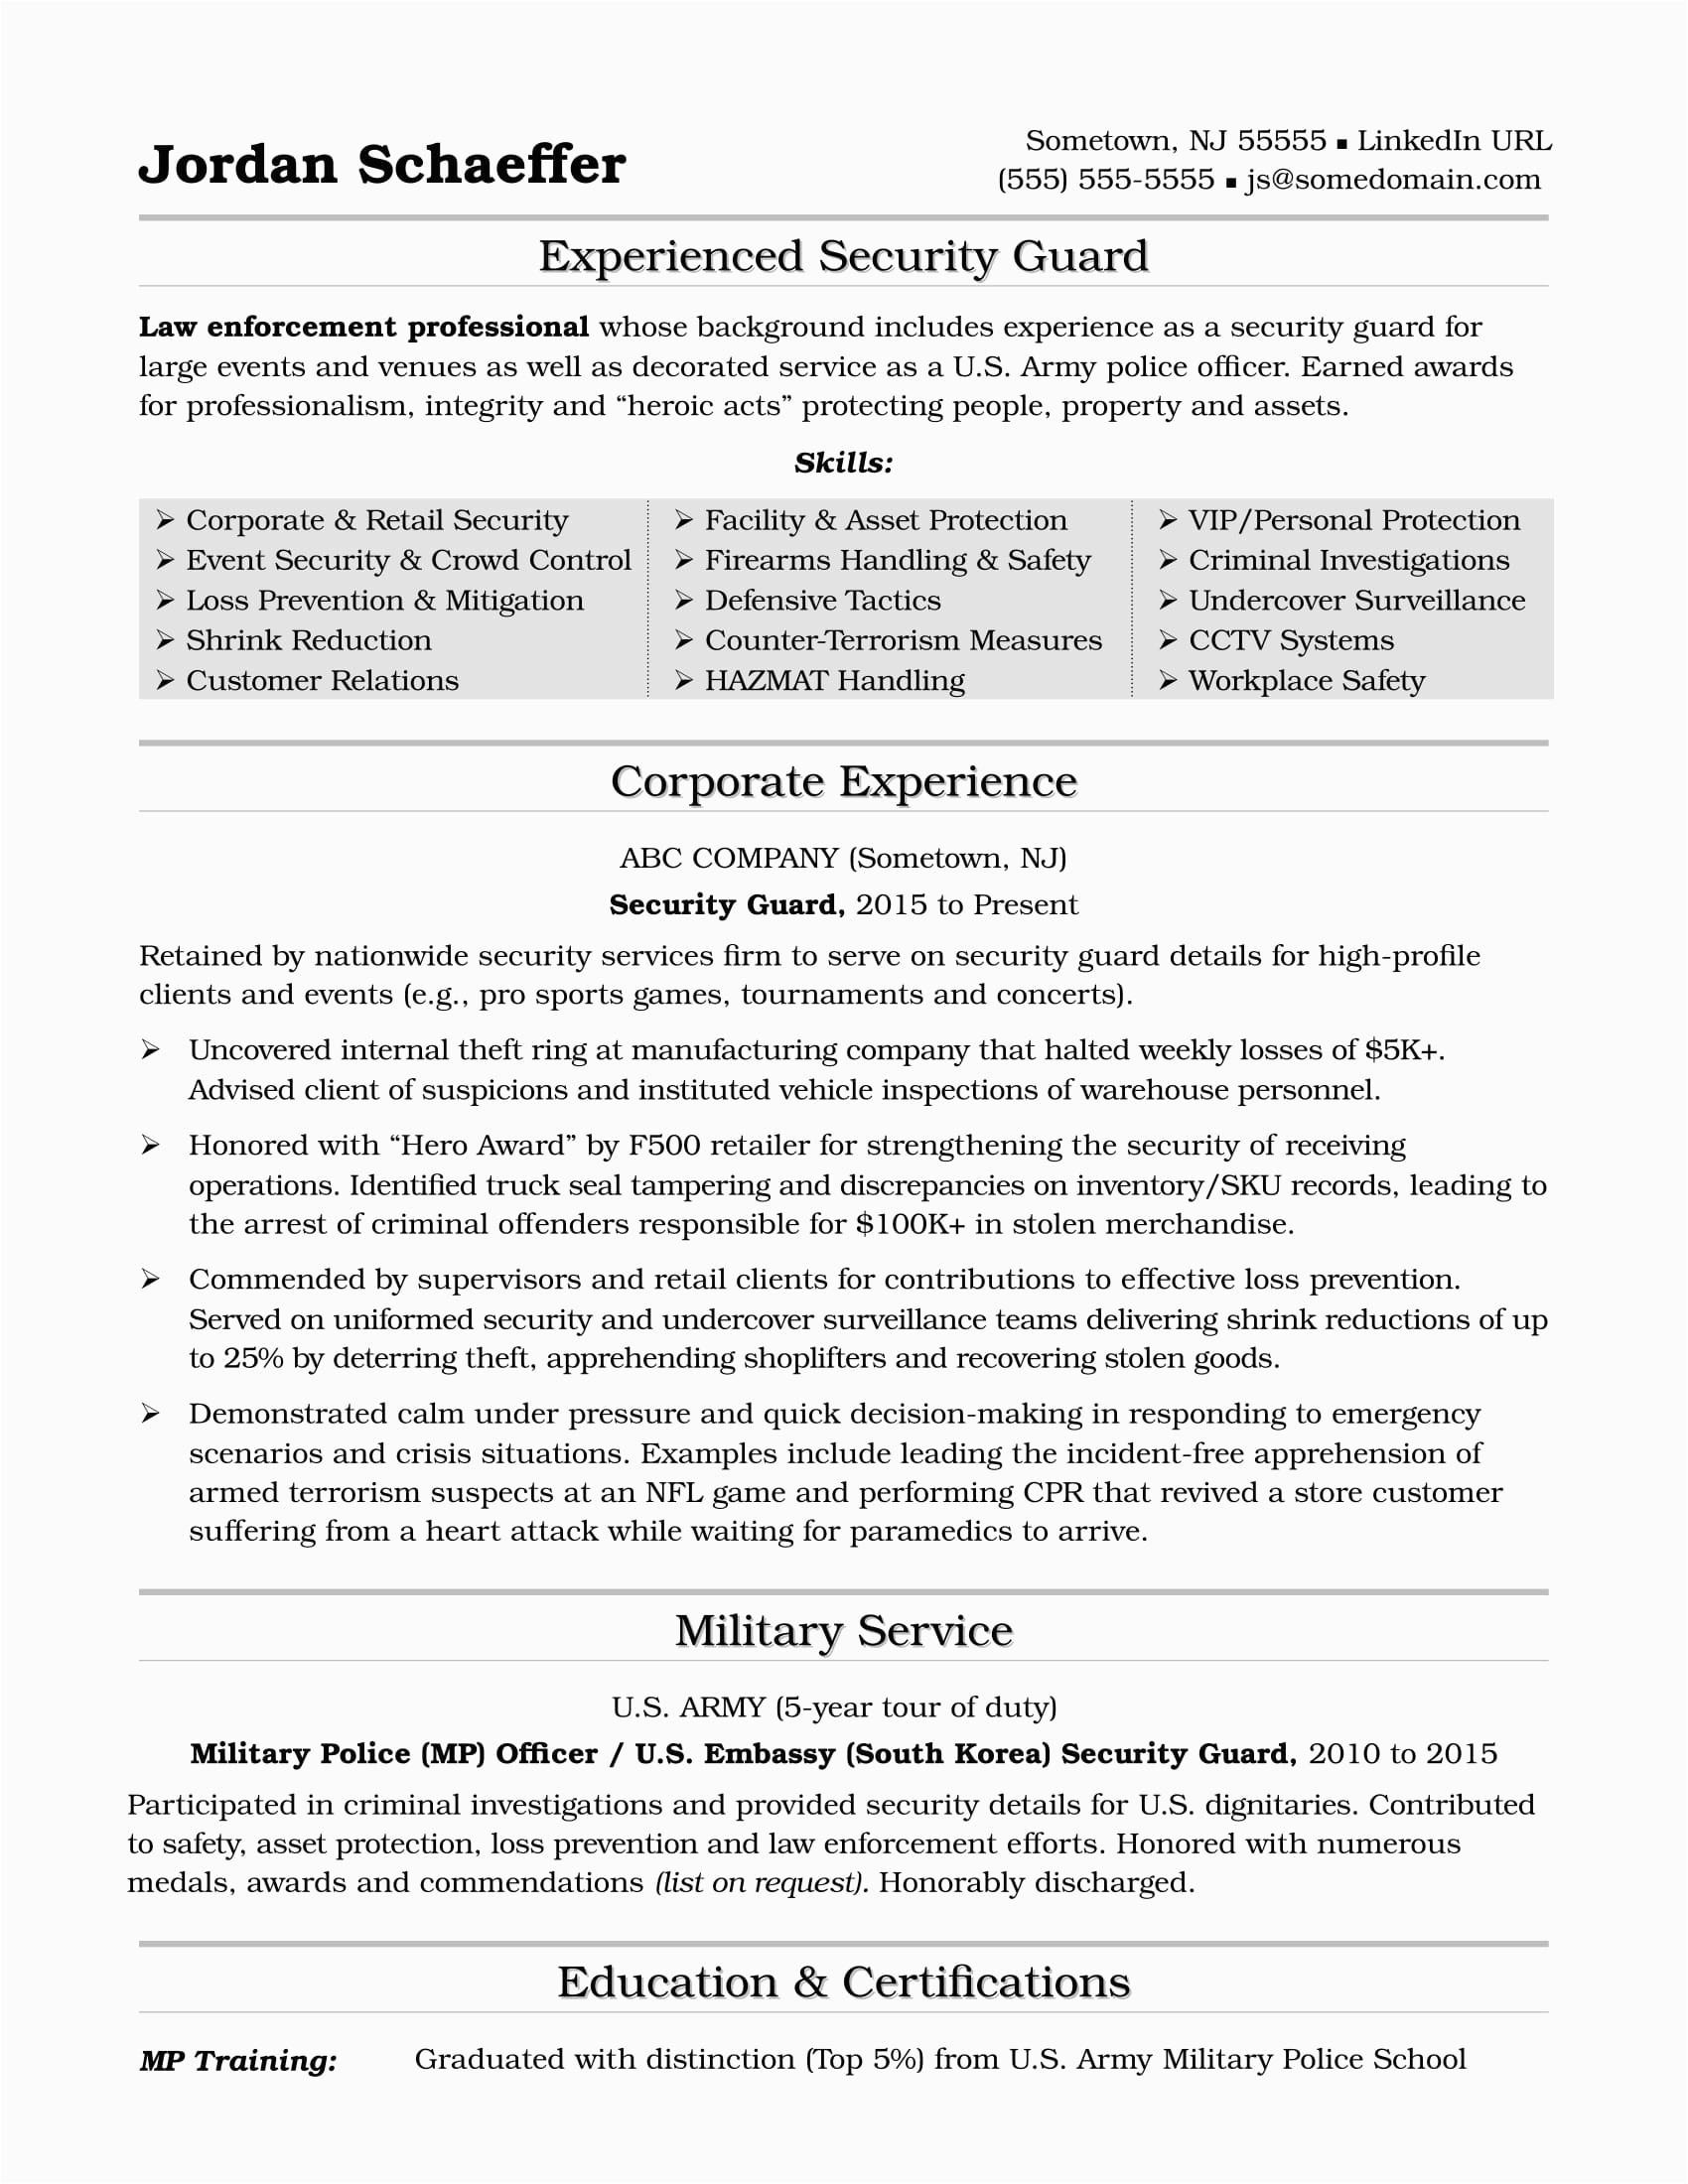 Resume Sample for New Security Guard Security Guard Resume